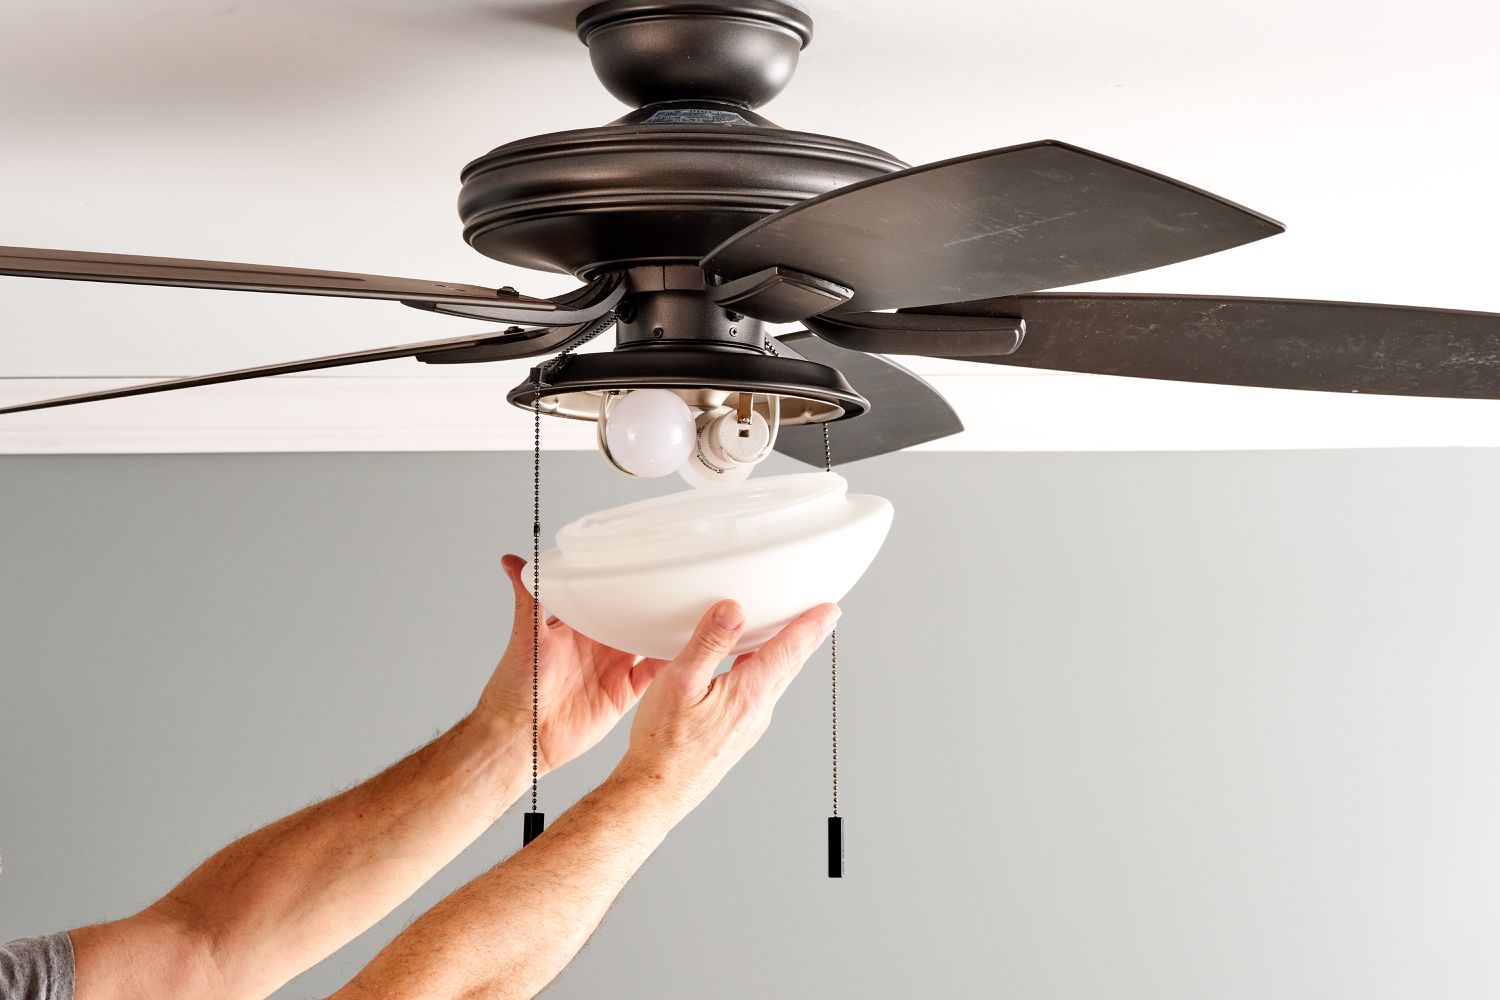 How To Take Off Light Cover On Ceiling Fan